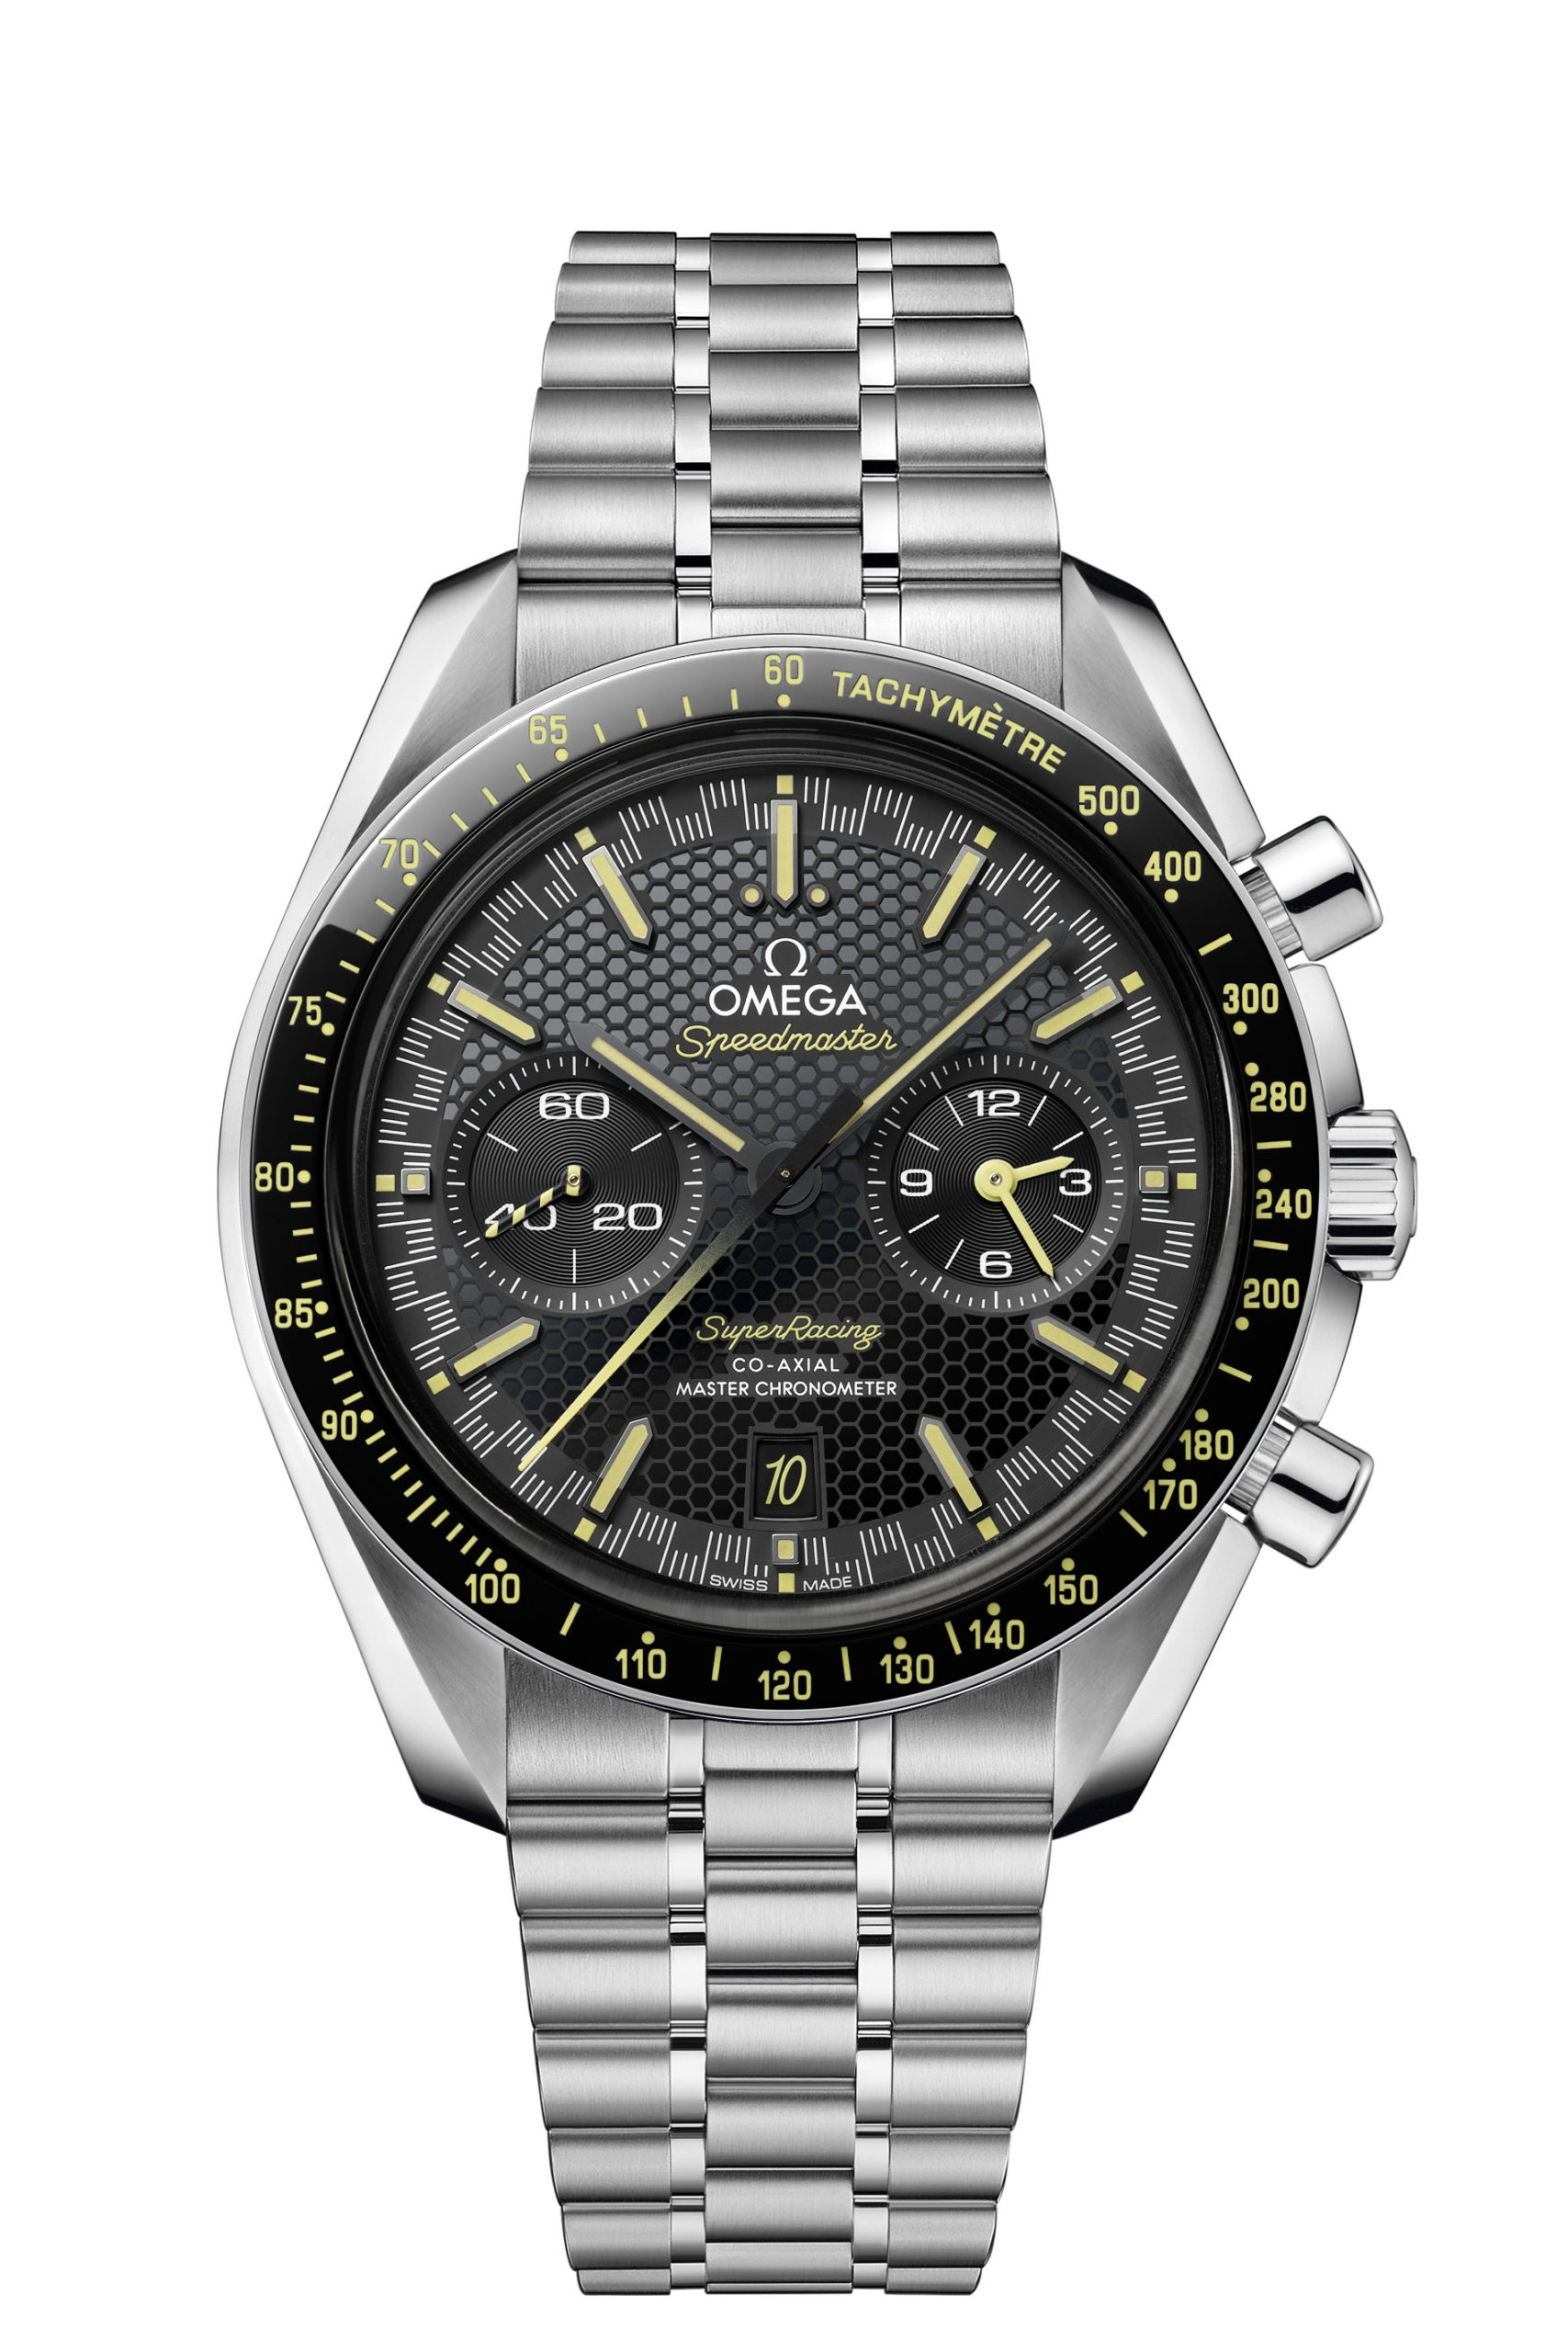 0/+2 seconds a day: Omega Unveils New Speedmaster Super Racing, Ultra Precise Spirate System